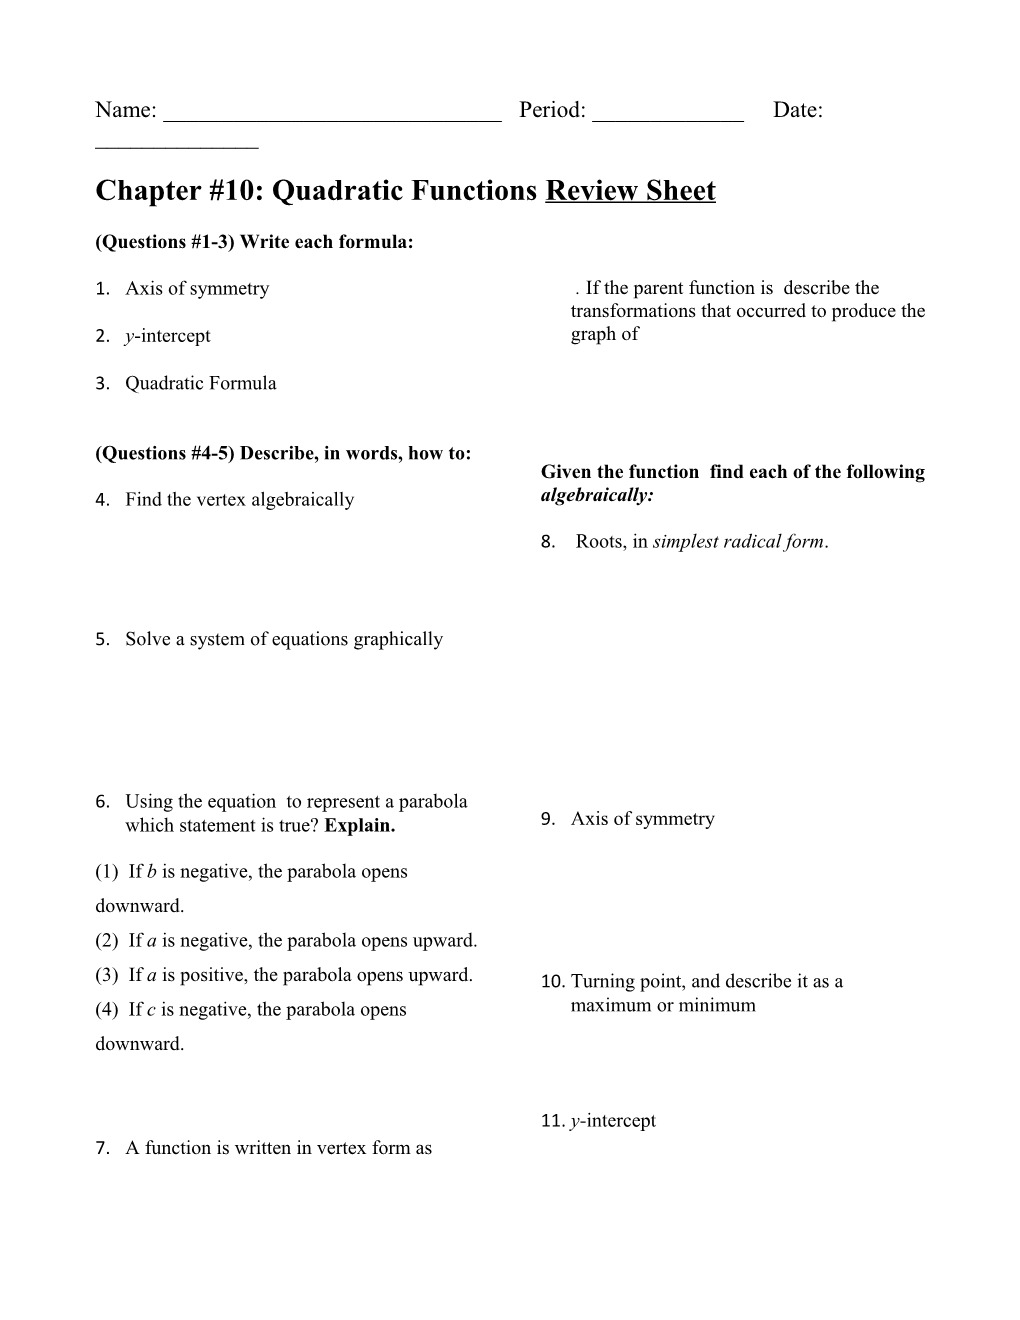 Chapter #10: Quadratic Functions Review Sheet